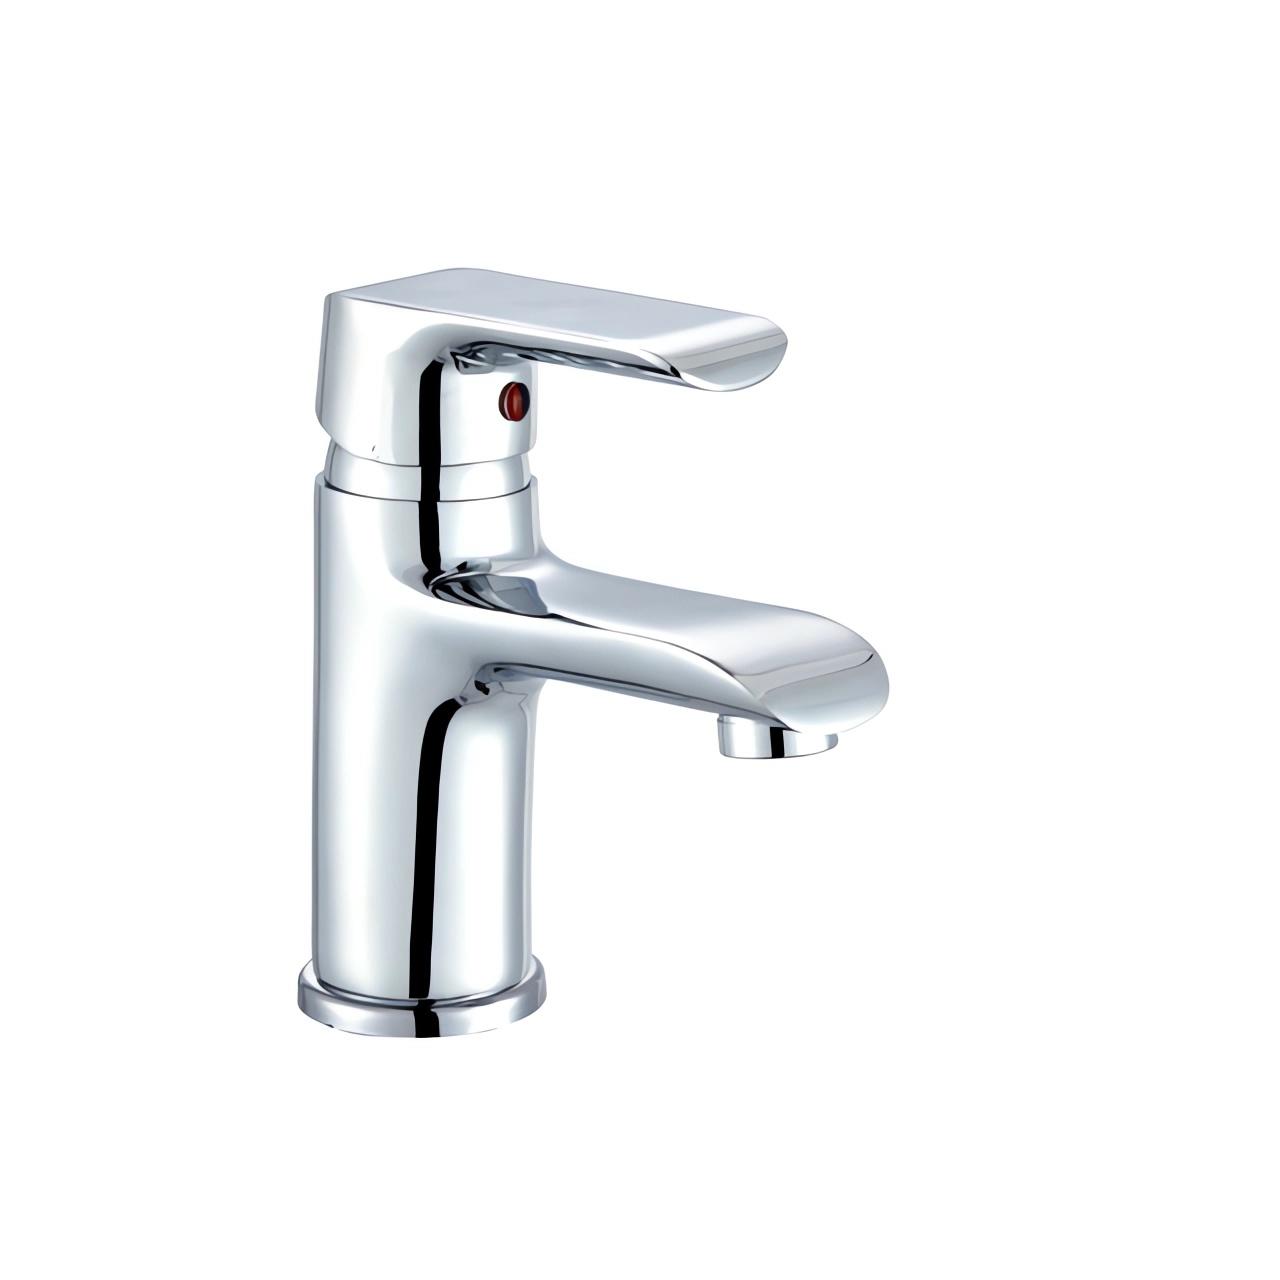 OJ-J1481H Small Size Full Brass Basin Faucet Bathroom Chrome Plating Faucet Single Lever Hot And Cold Water Brass Basin Faucet